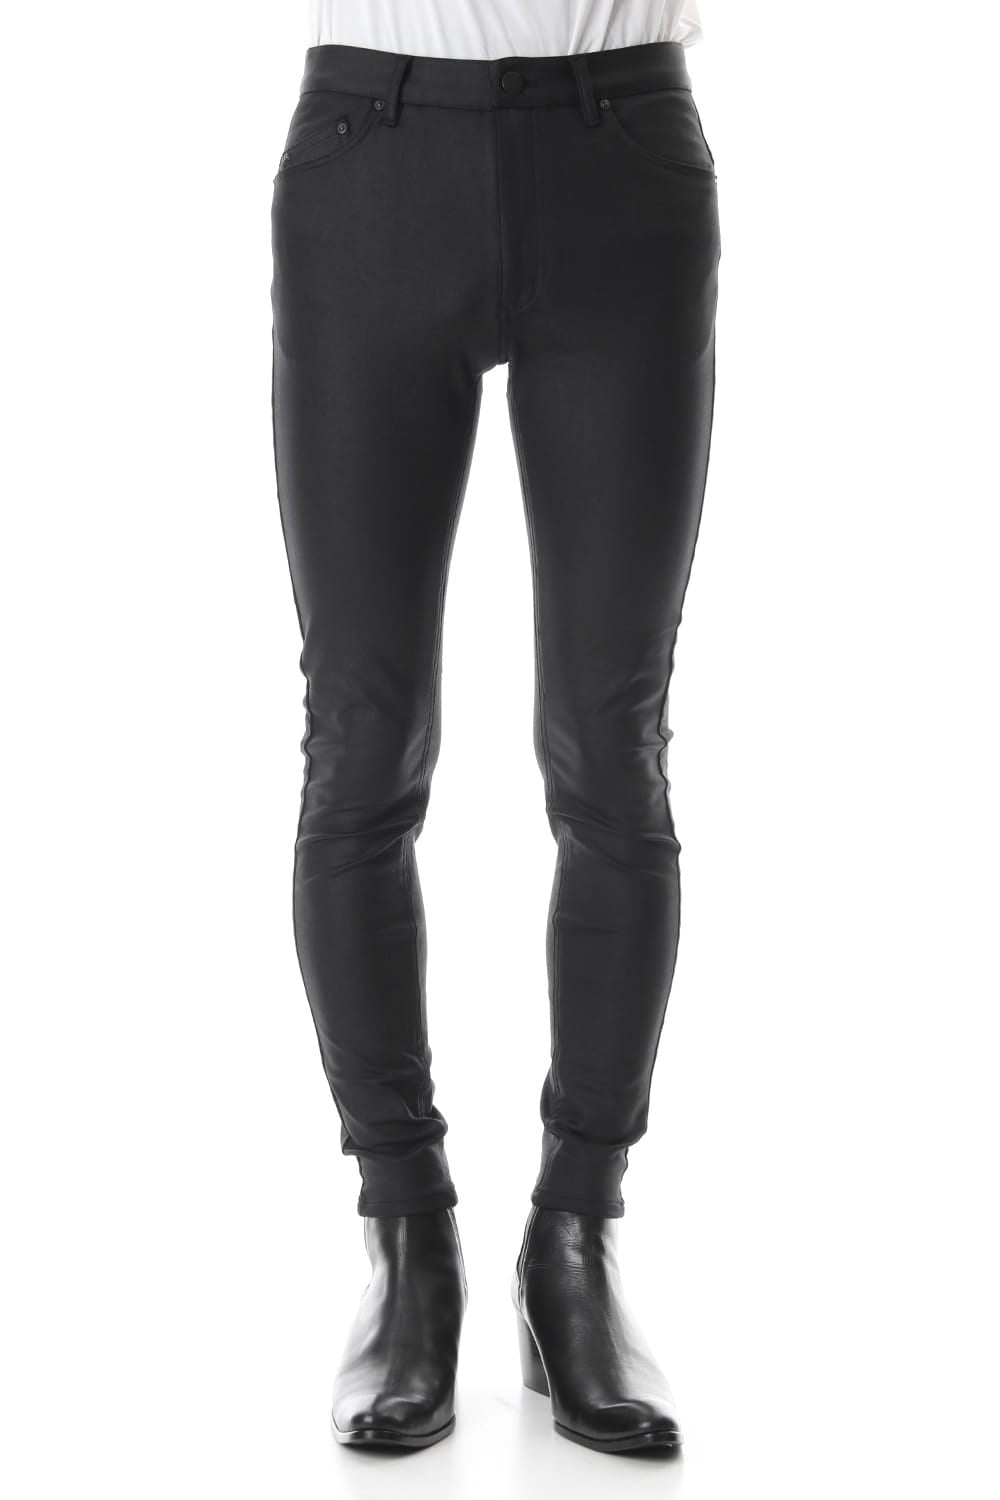 Womens Sexy High Waist Hip Lift Tight Pants Faux Leather Stretch Leggings  Black-1 XS at Amazon Women's Clothing store